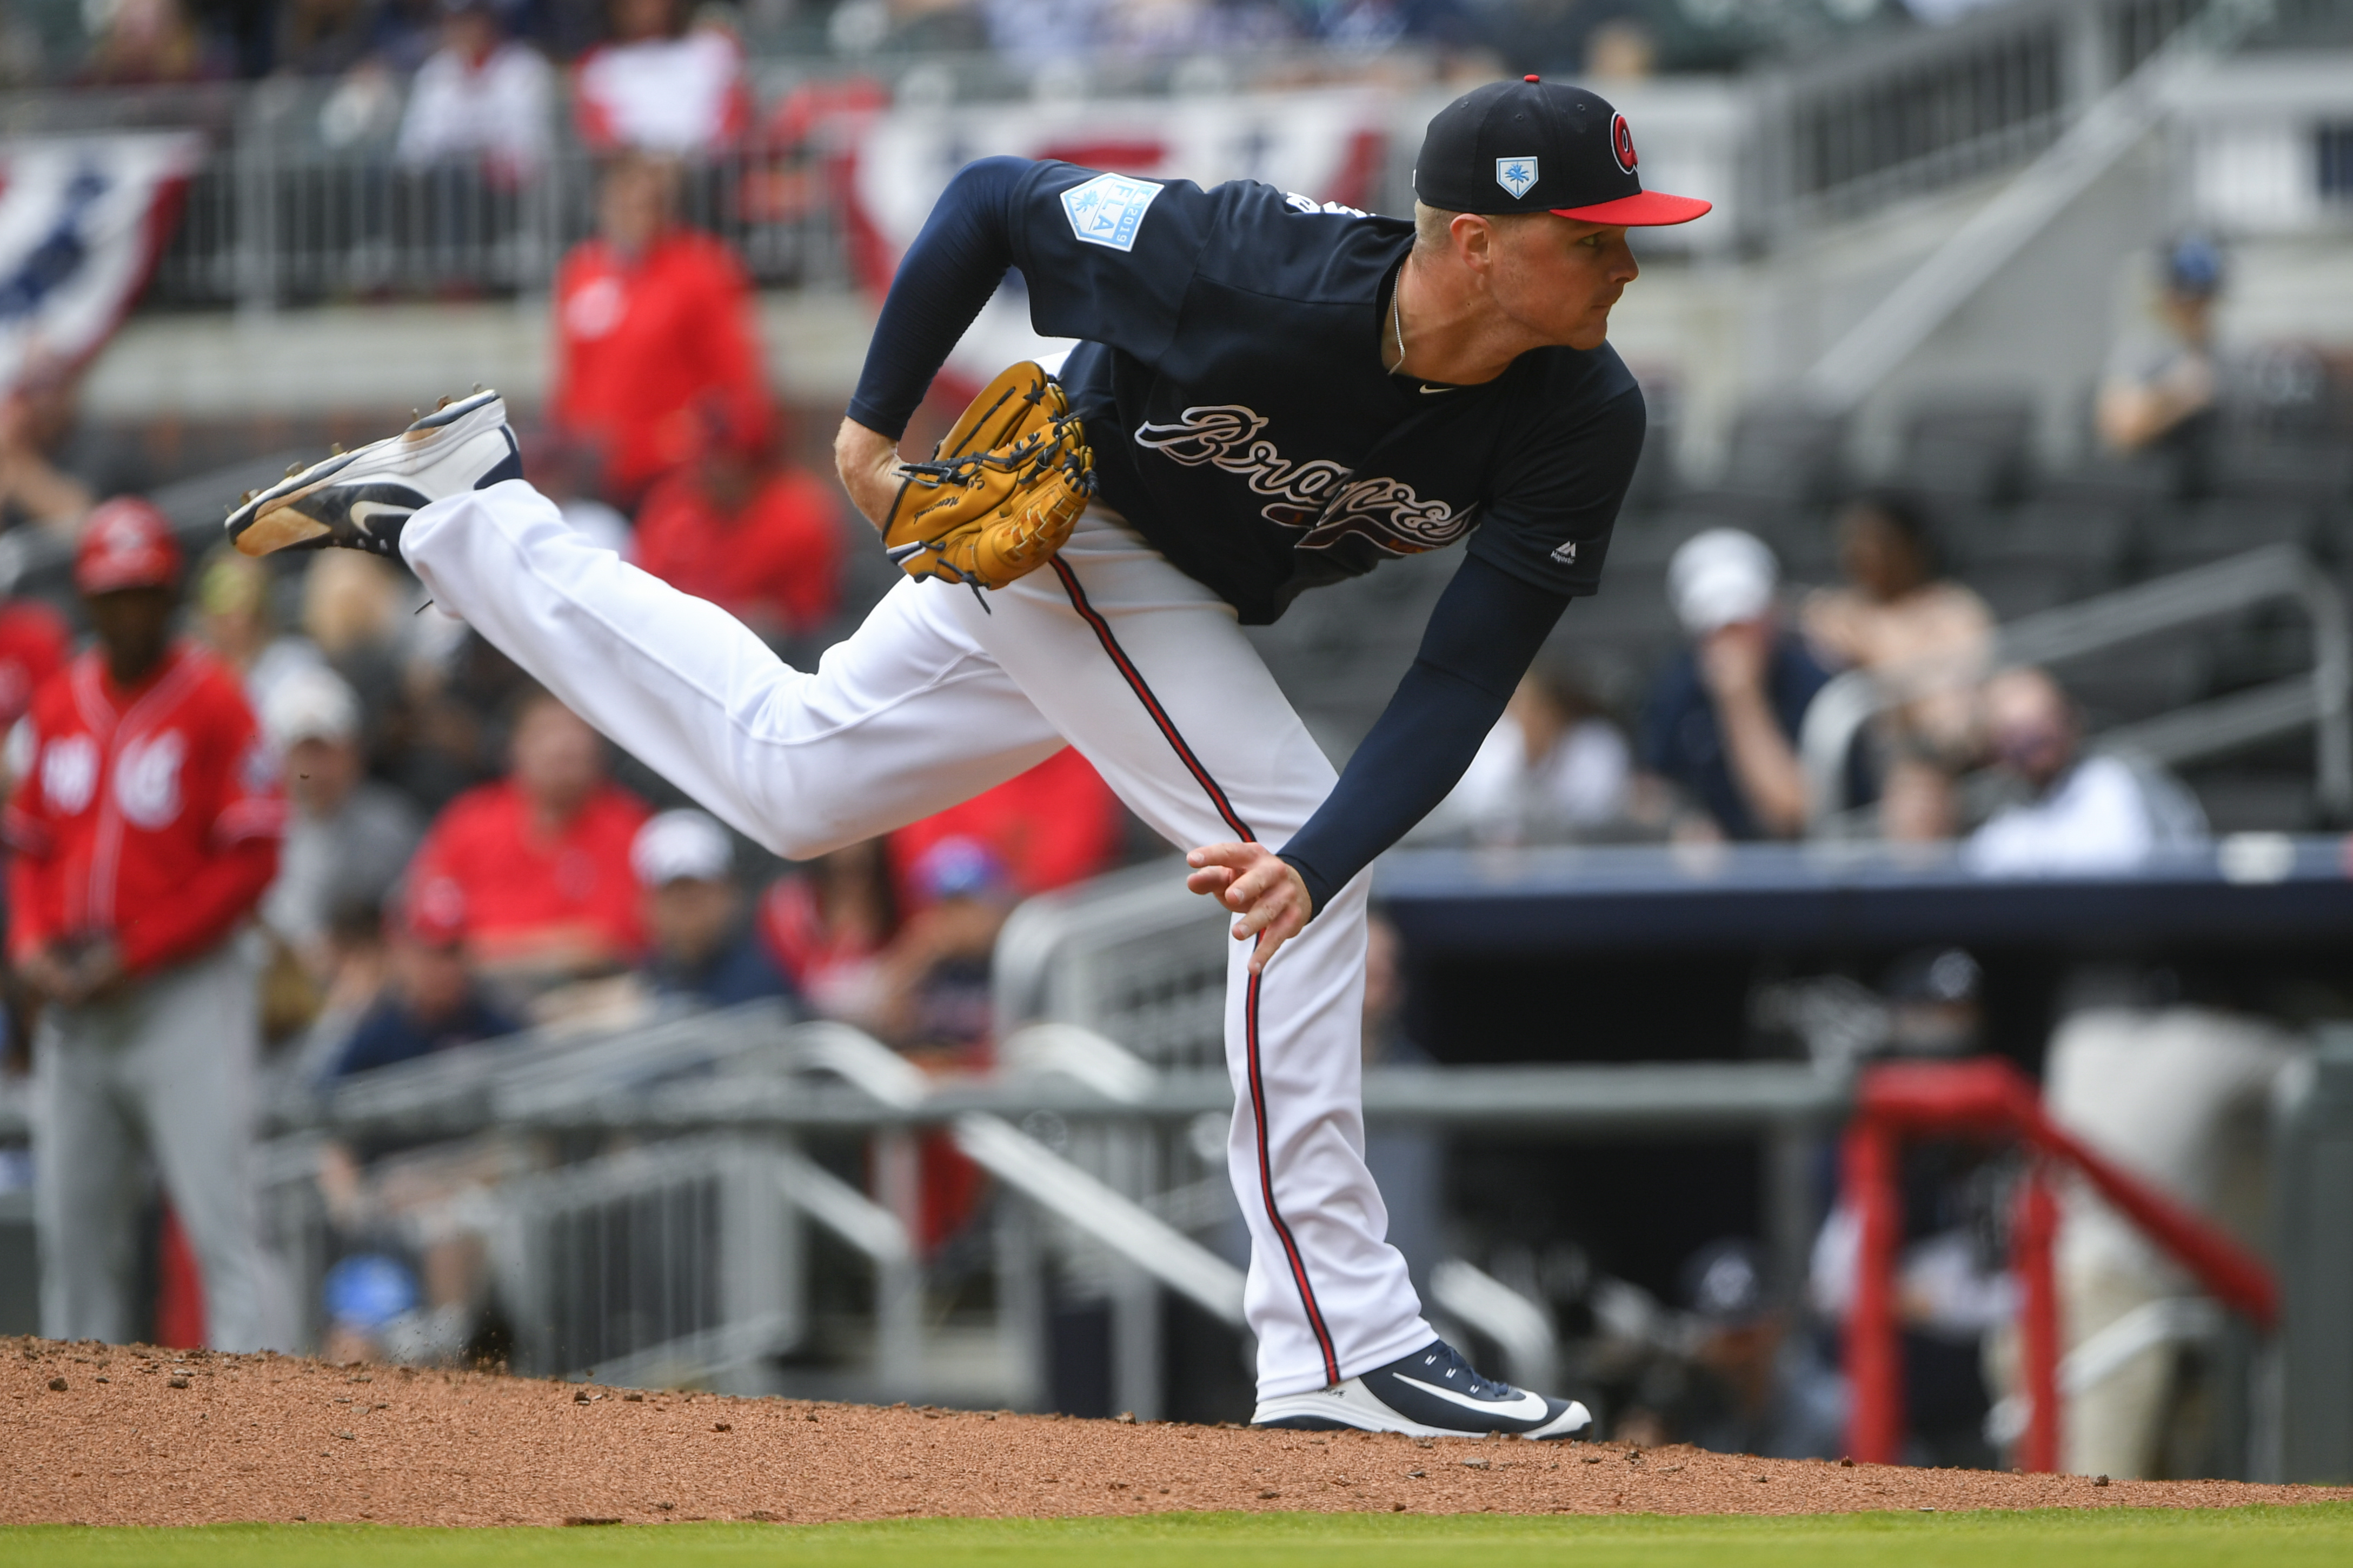 Newcomb pitches 4 strong innings, Braves beat Reds 7-5